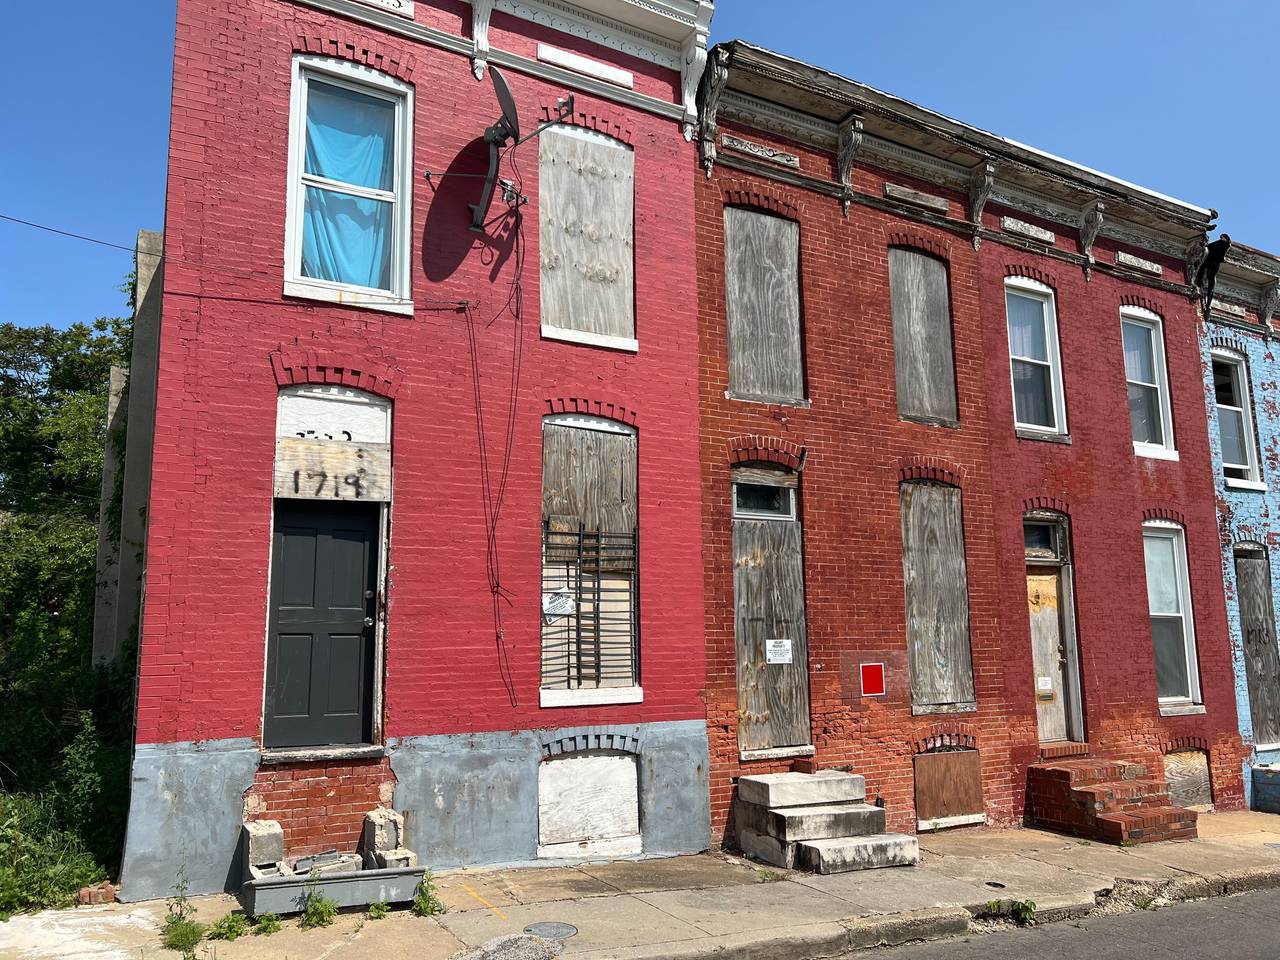 An investor client of ABC Capital believed he purchased this home in the 1700 block of North Bethel Street, but it’s listed as owned by another investor and remains vacant.